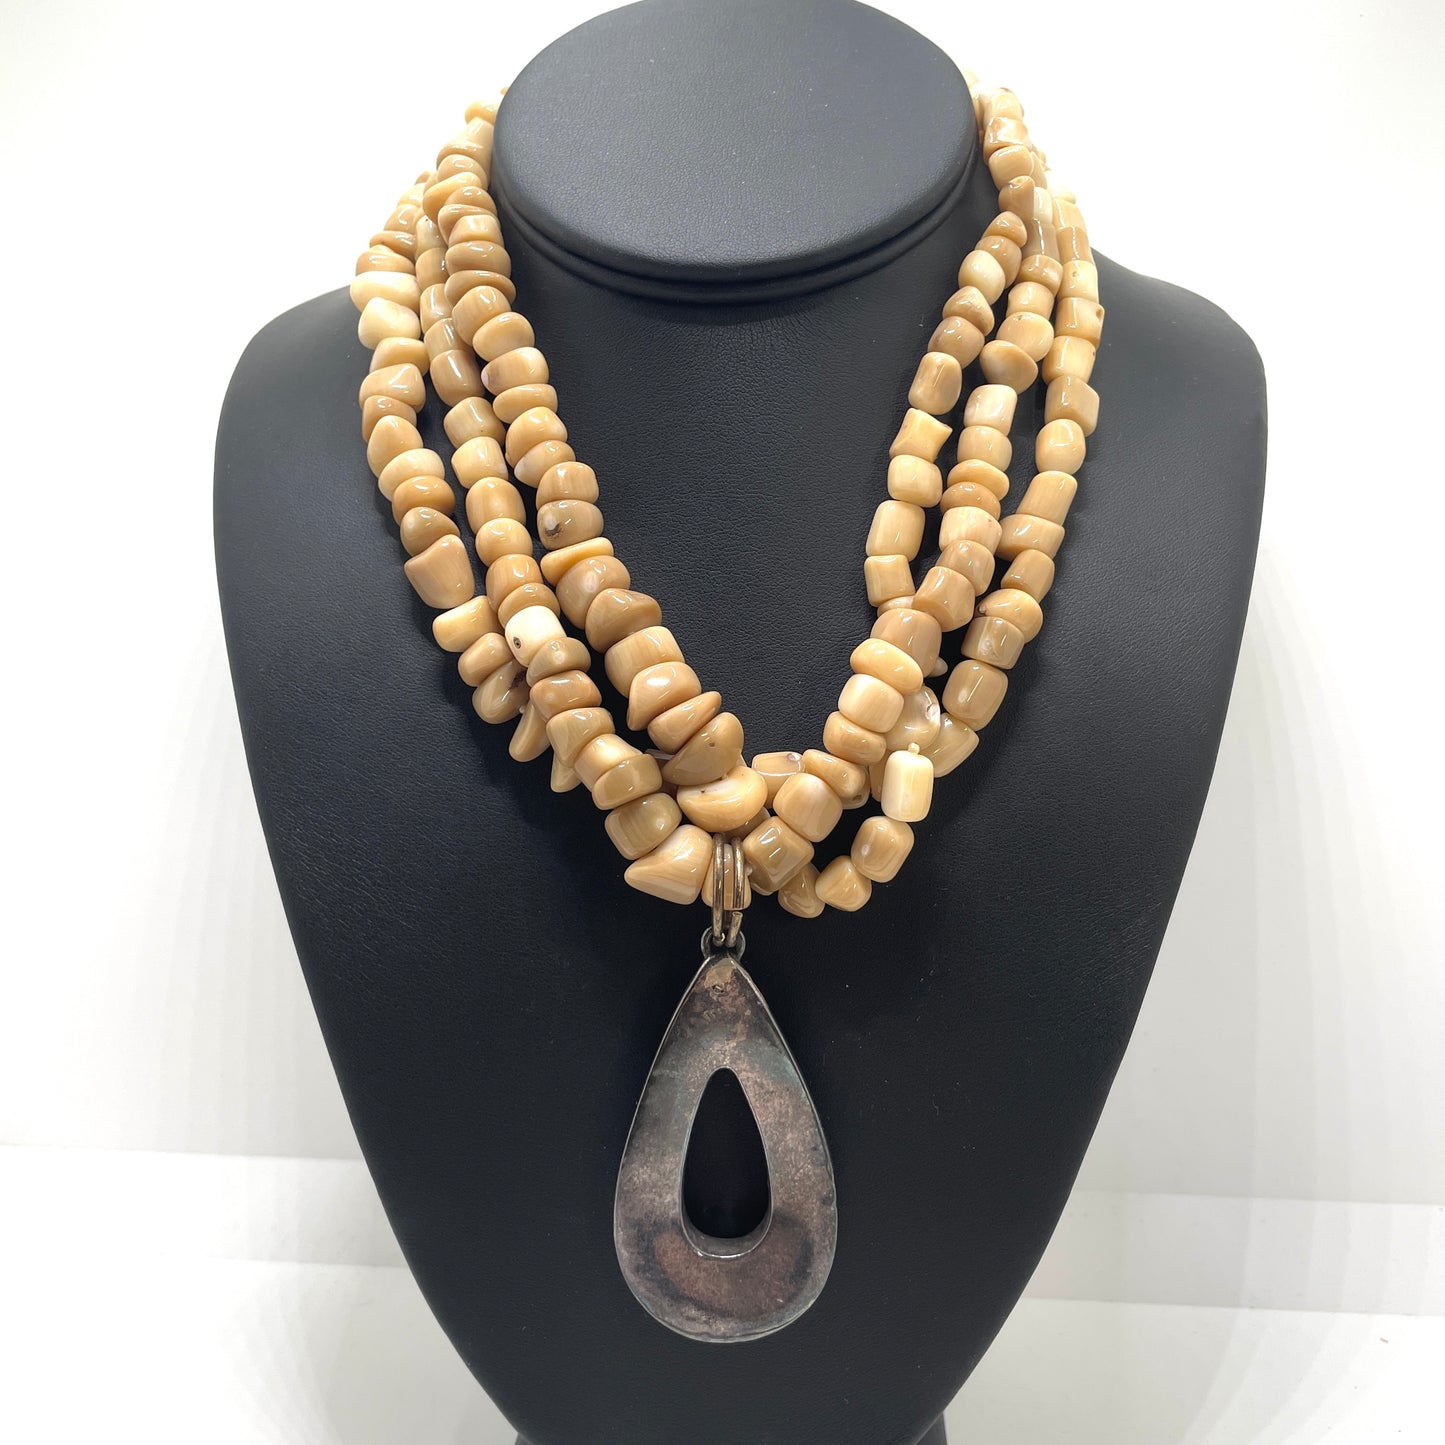 Vintage Brown Beaded Necklace with Silver Pendant